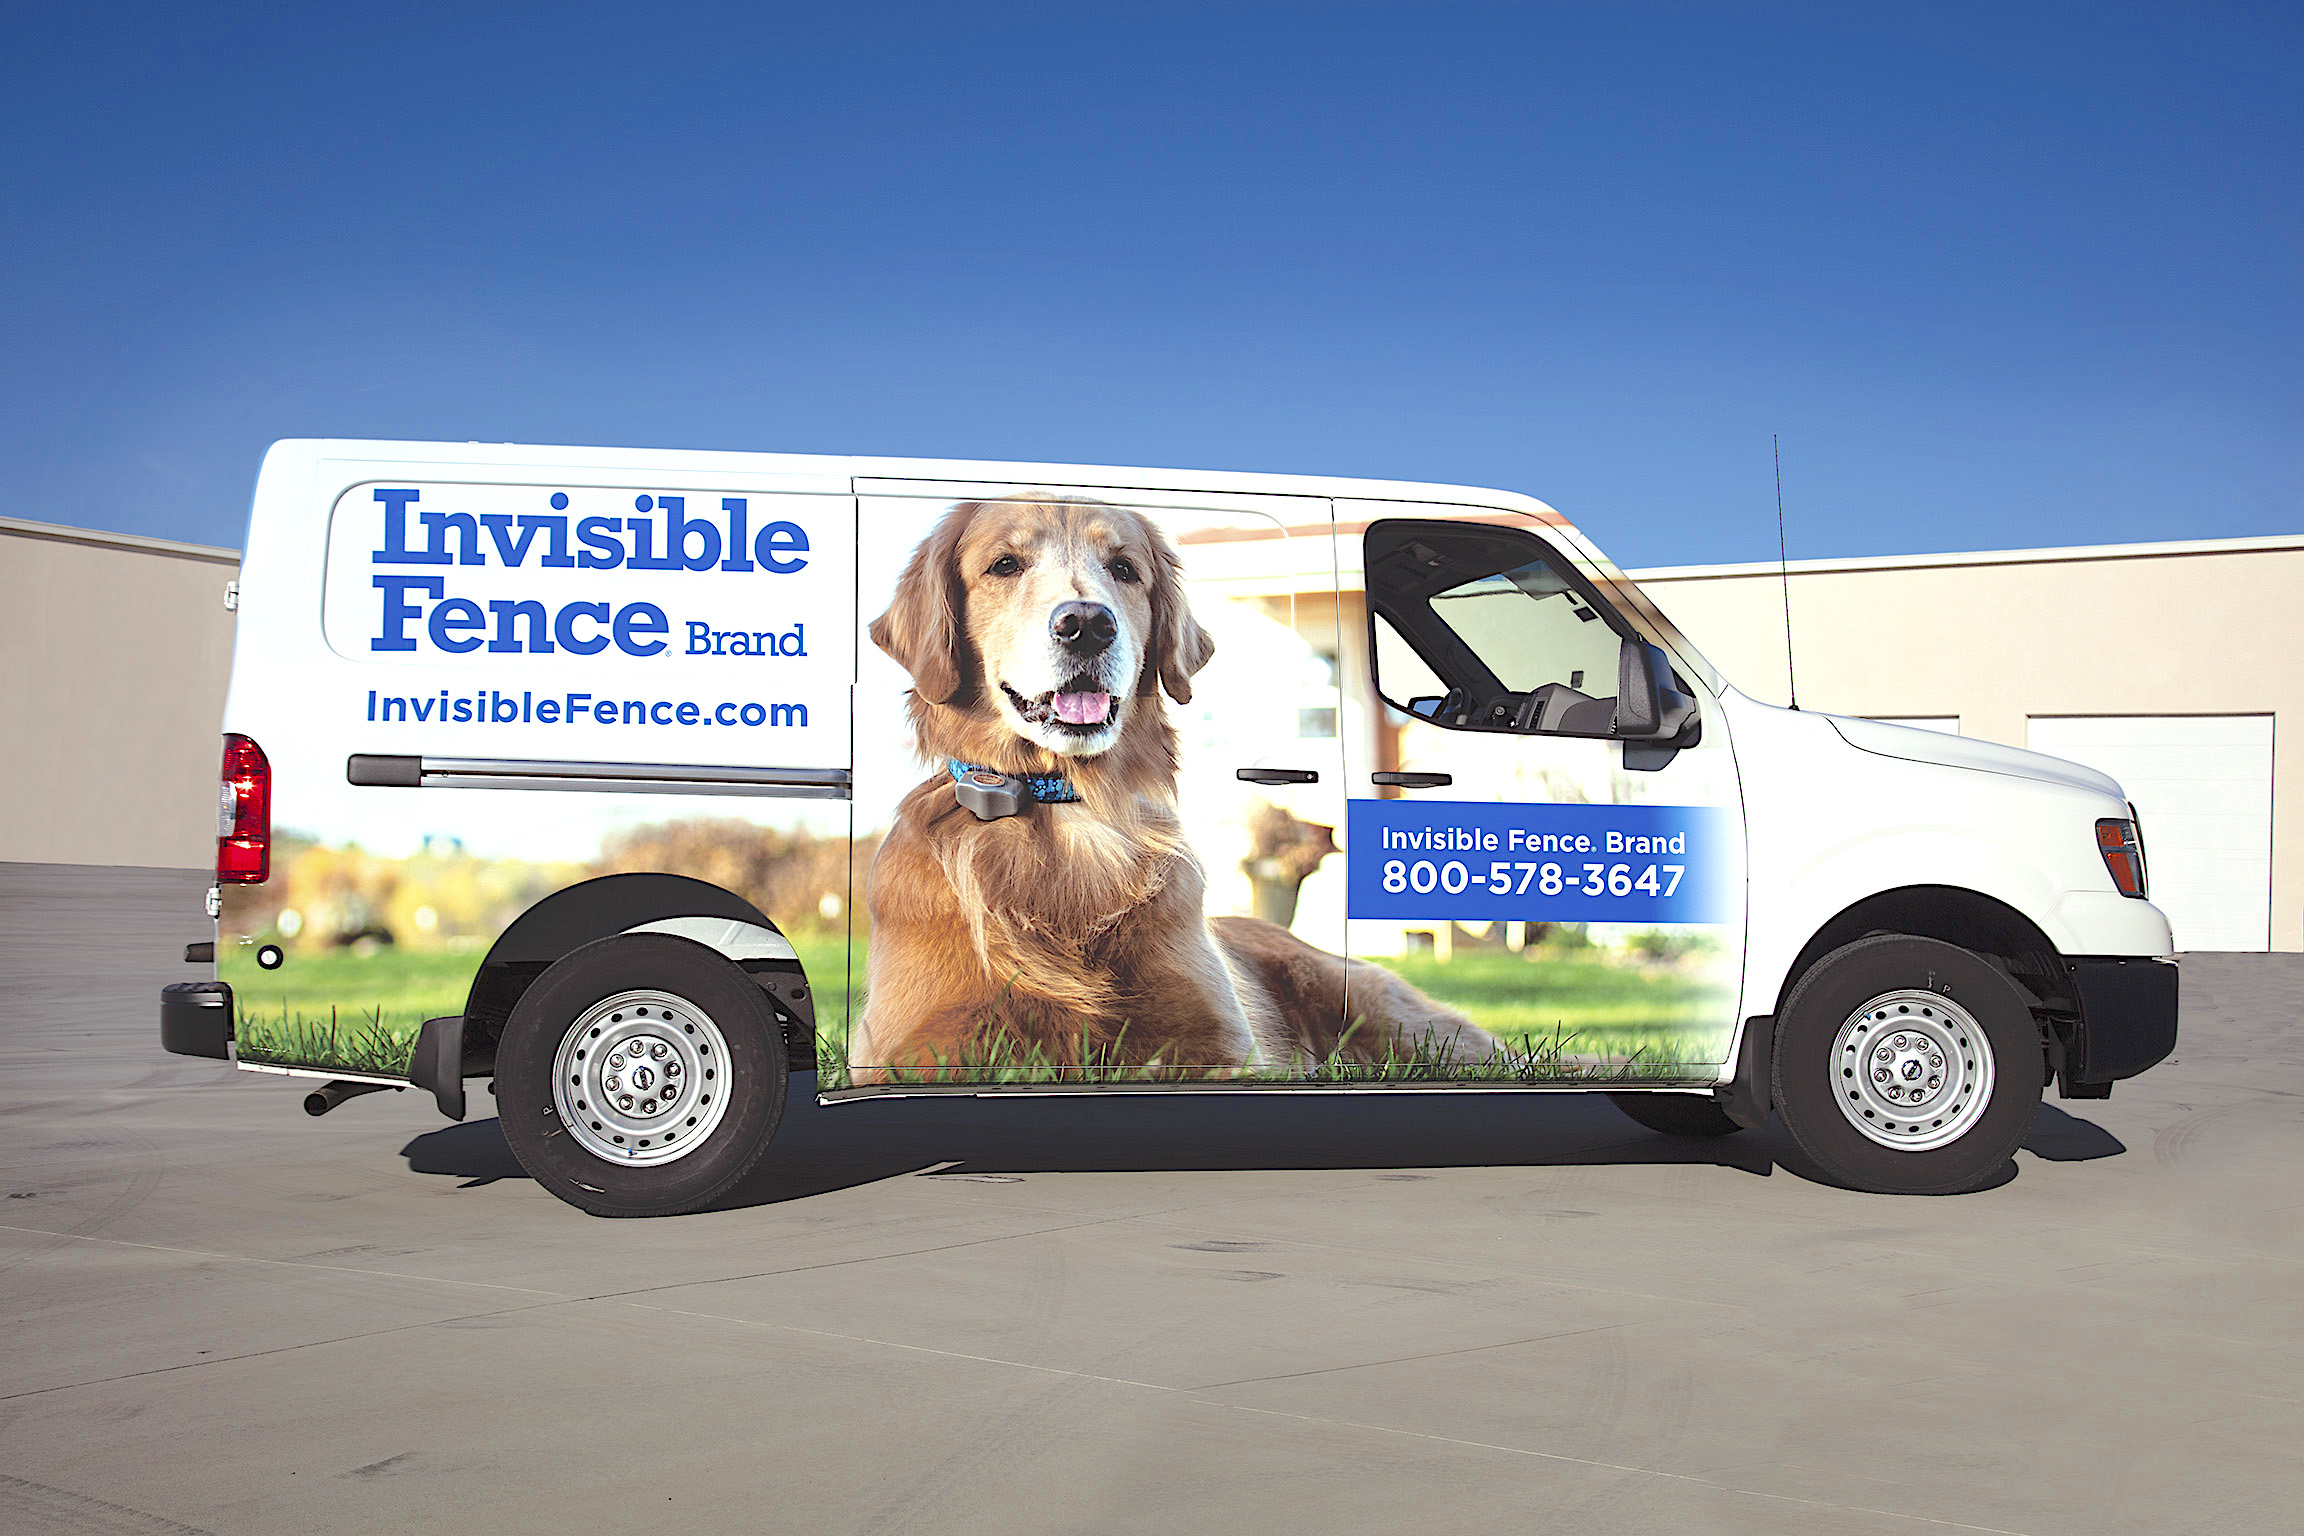 Invisible fence full van wrap